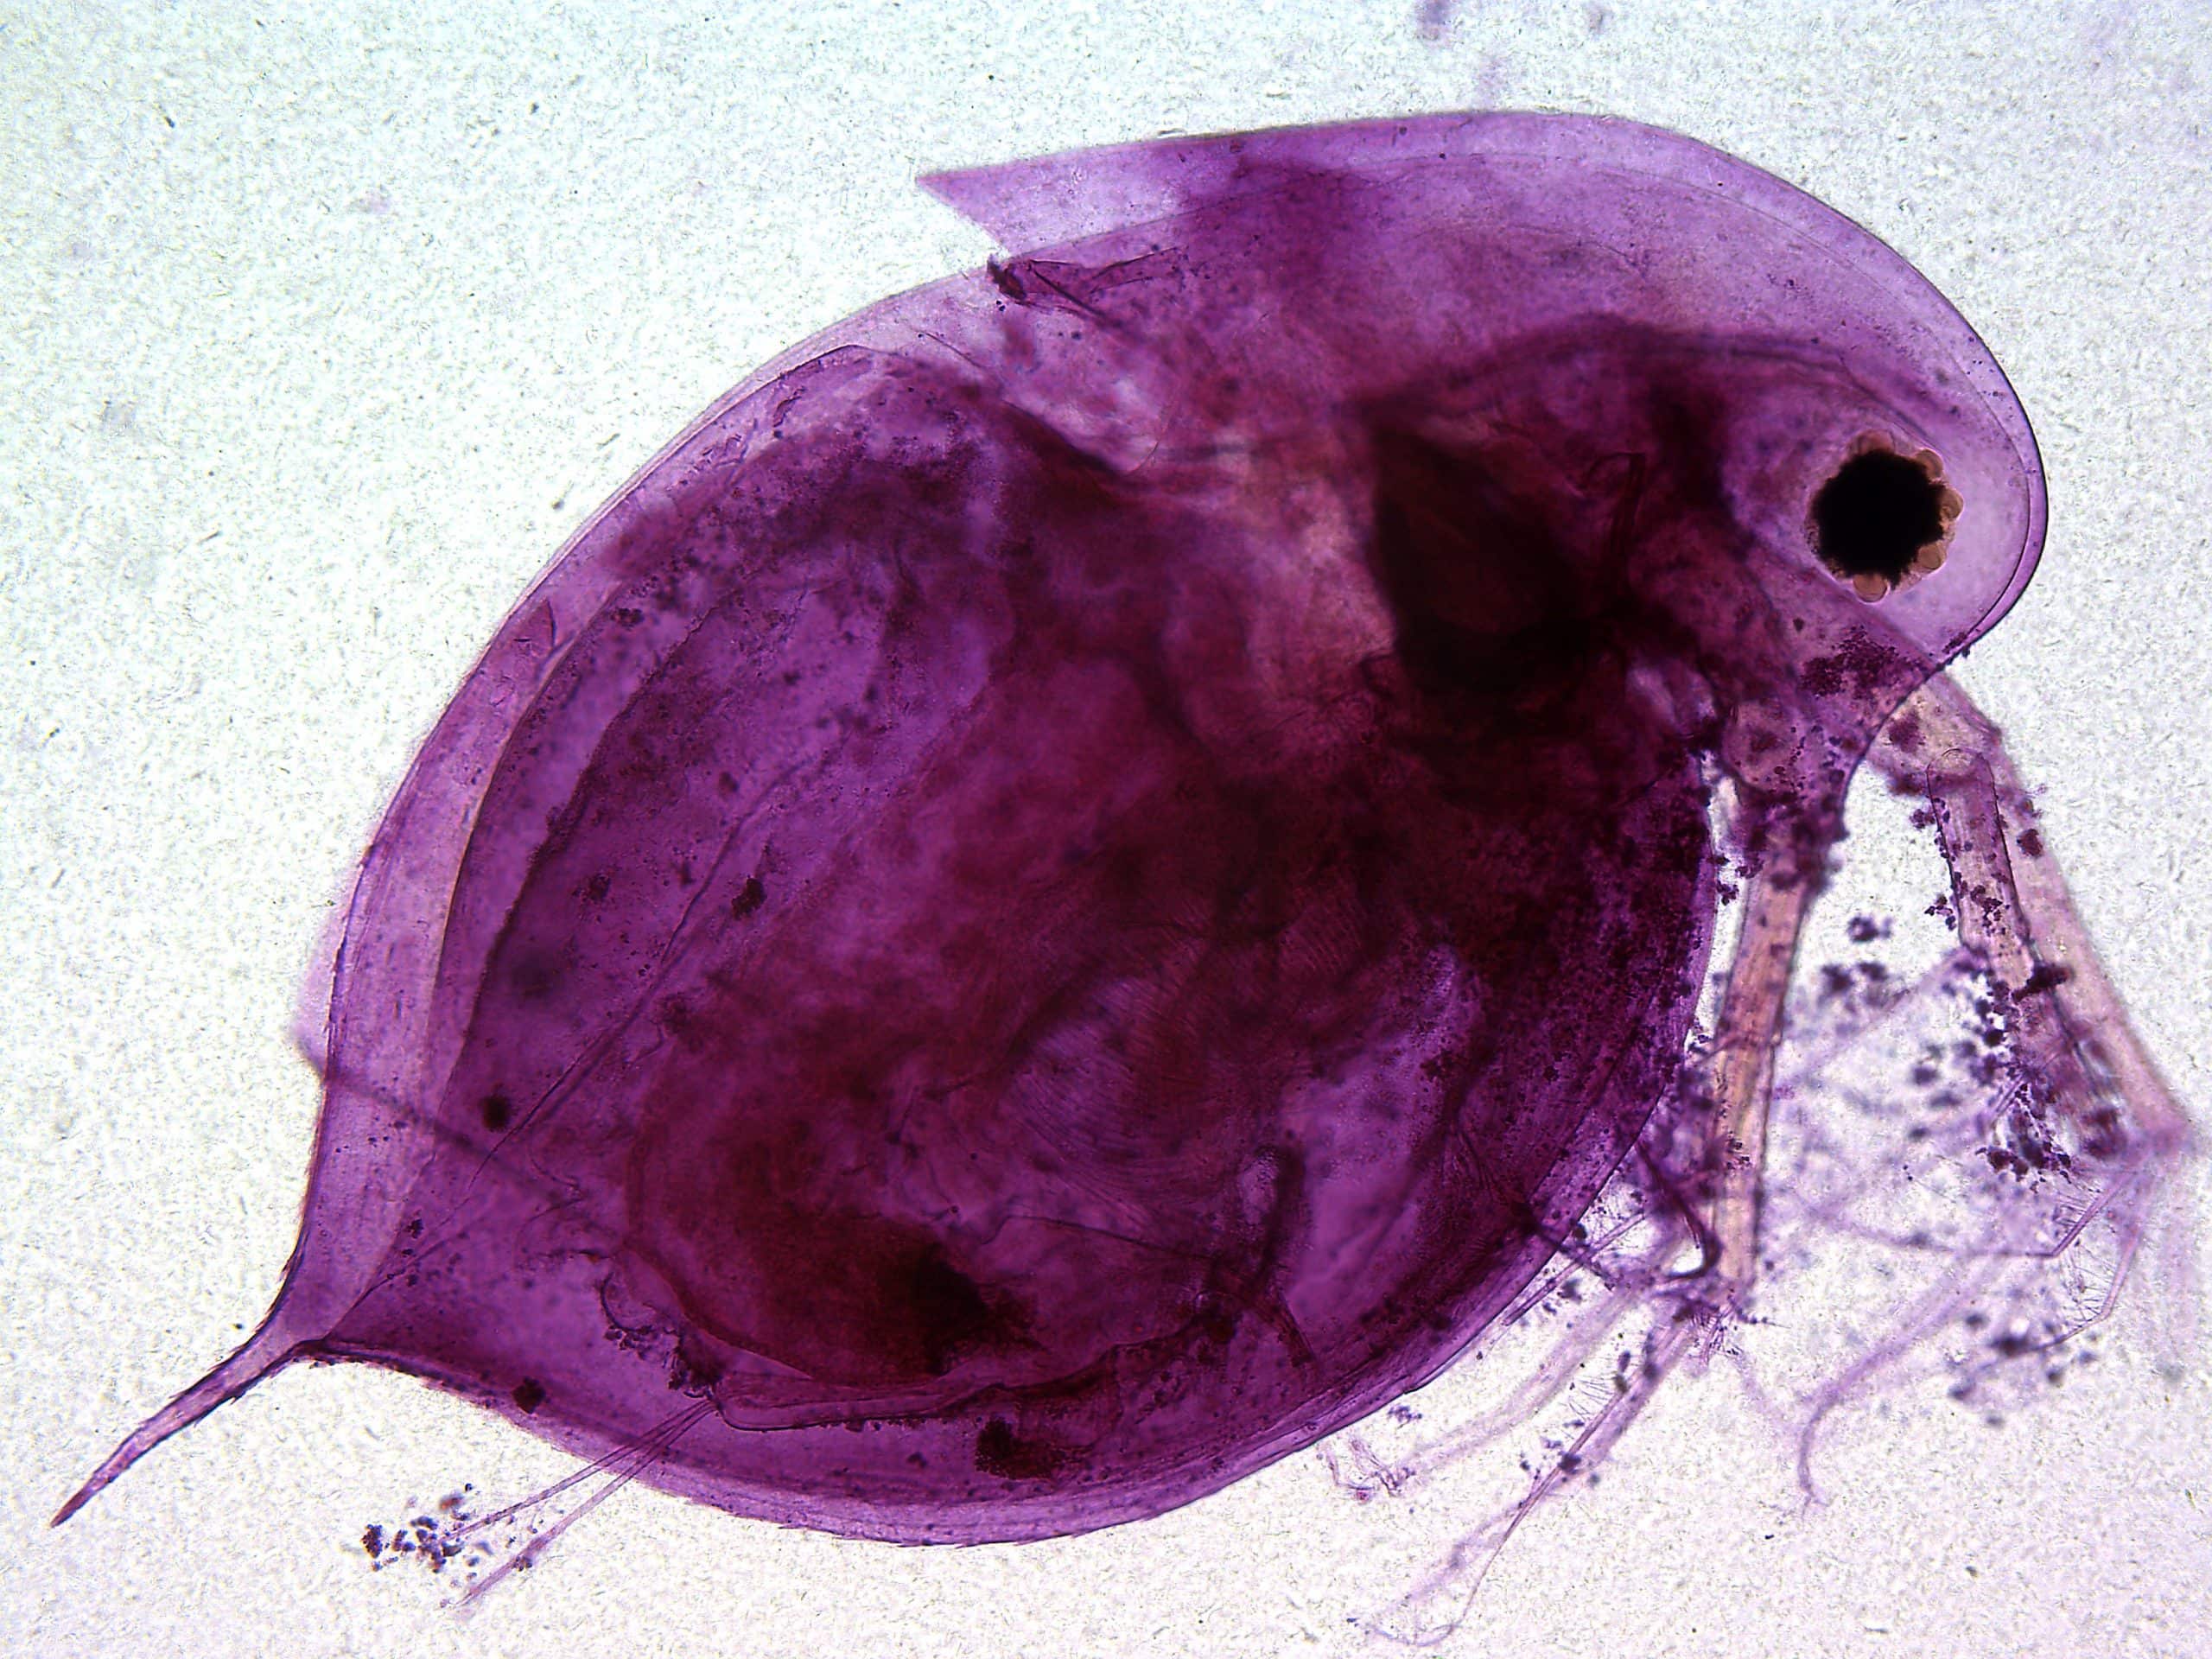 Daphnia are incredible little freshwater critters!